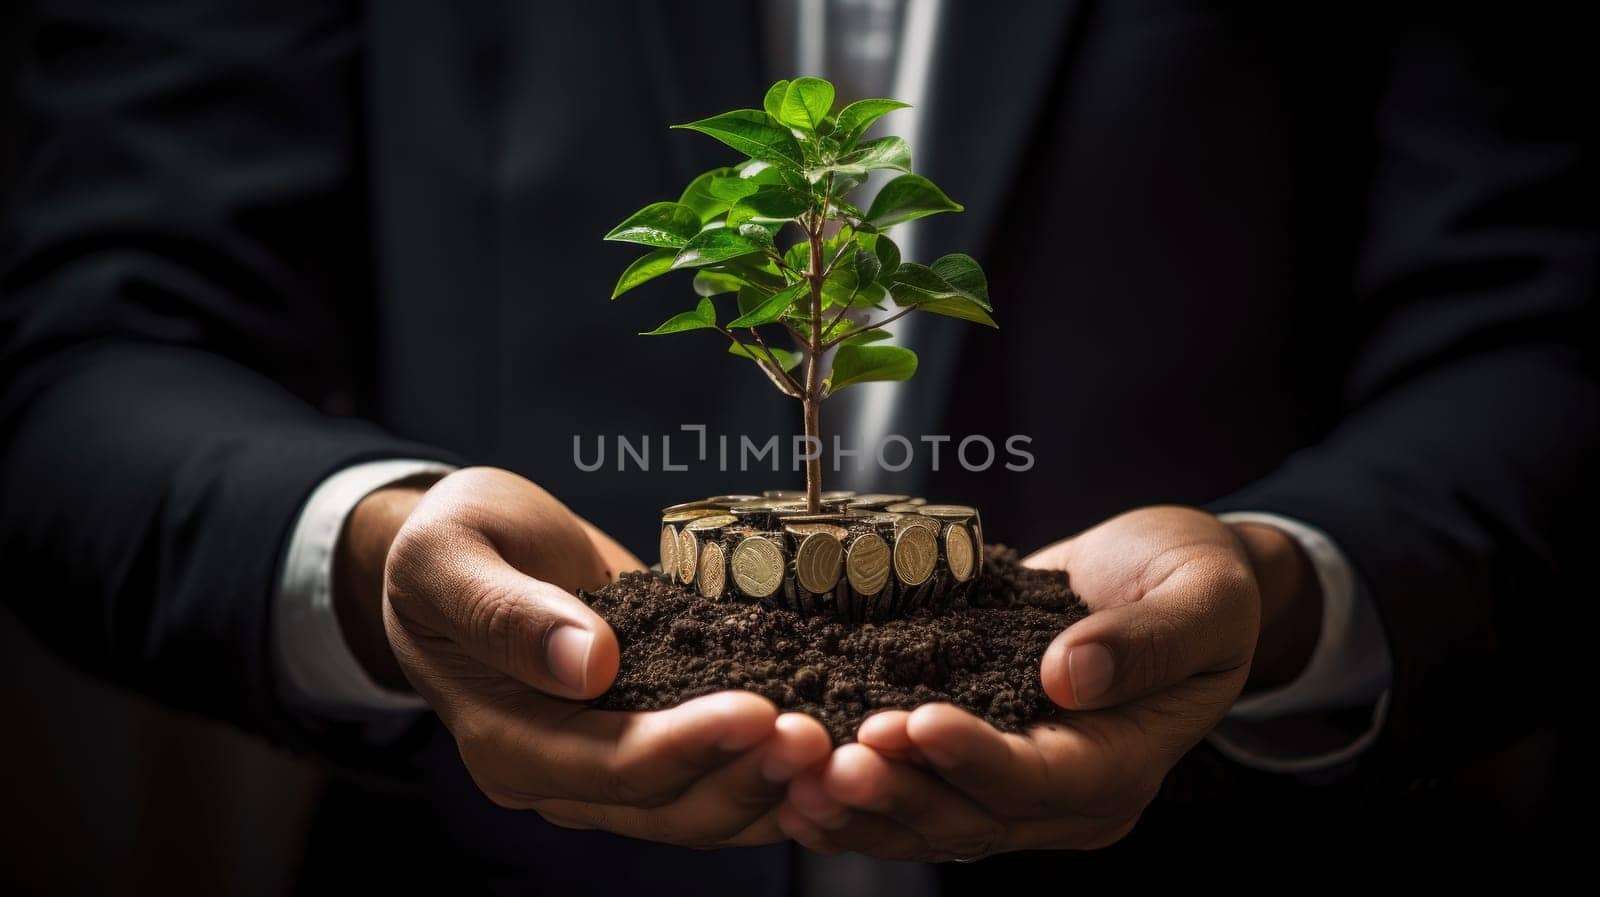 Sapling Thrives on a Hand Grasping Silver Coins. Capturing Green Business Concepts for Finance and Investment. Symbolic Representation of Carbon Credits and Eco-Friendly Taxation Strategies. by ViShark